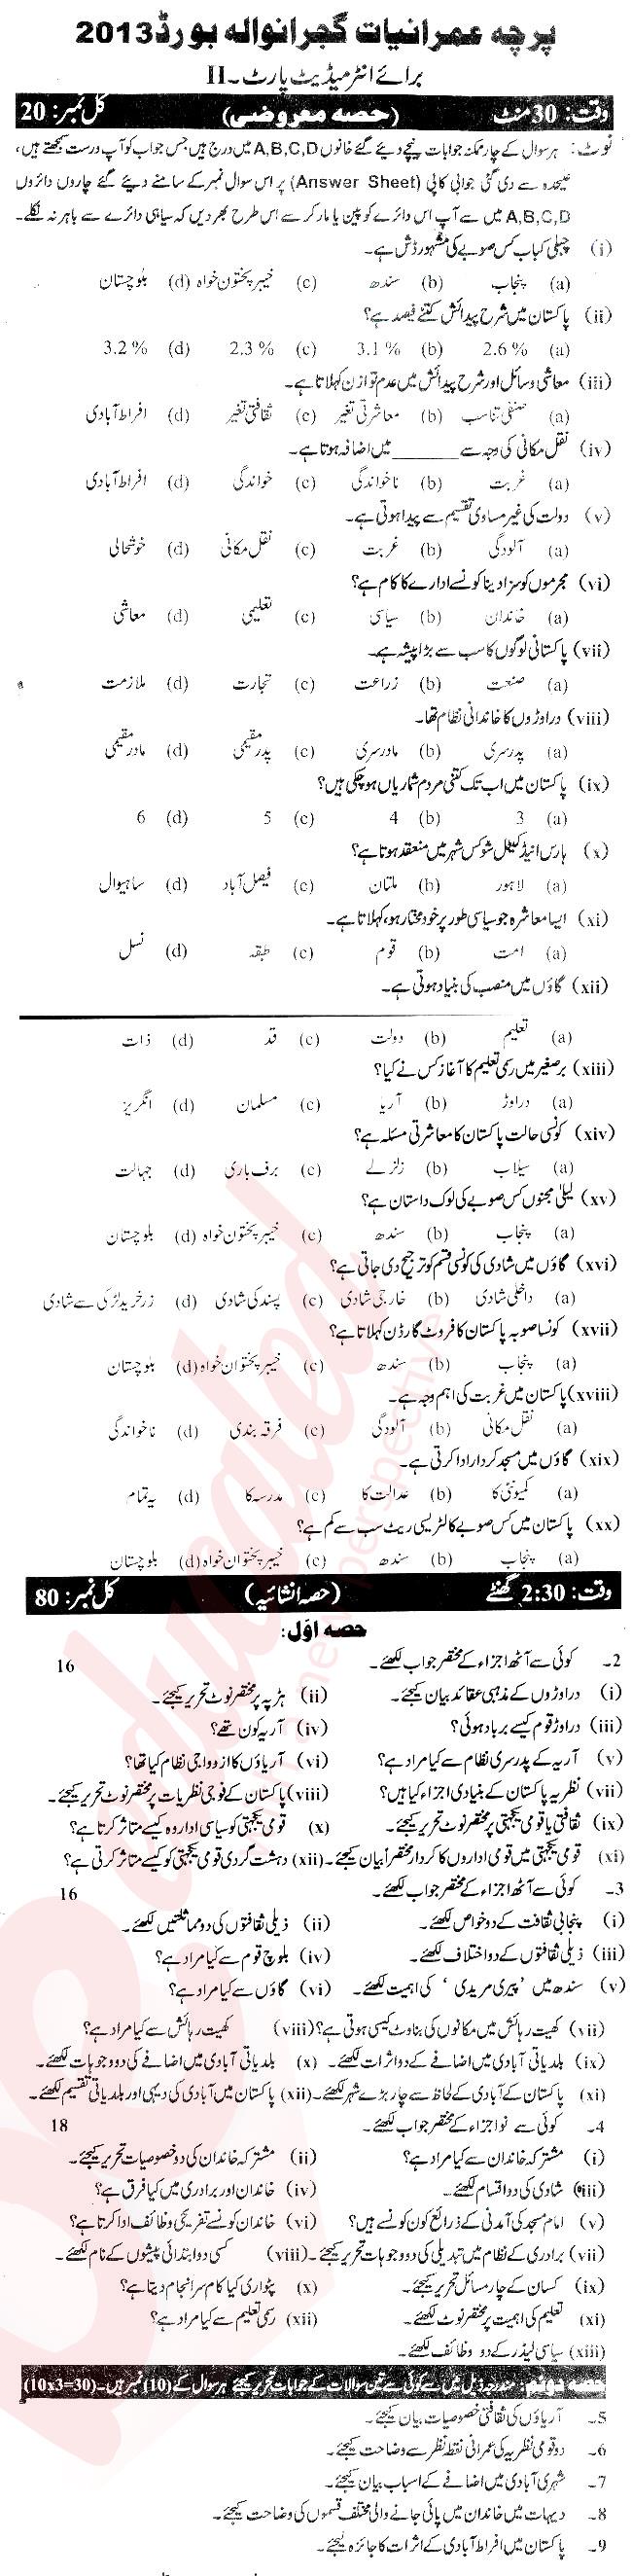 Sociology FA Part 2 Past Paper Group 1 BISE Gujranwala 2013